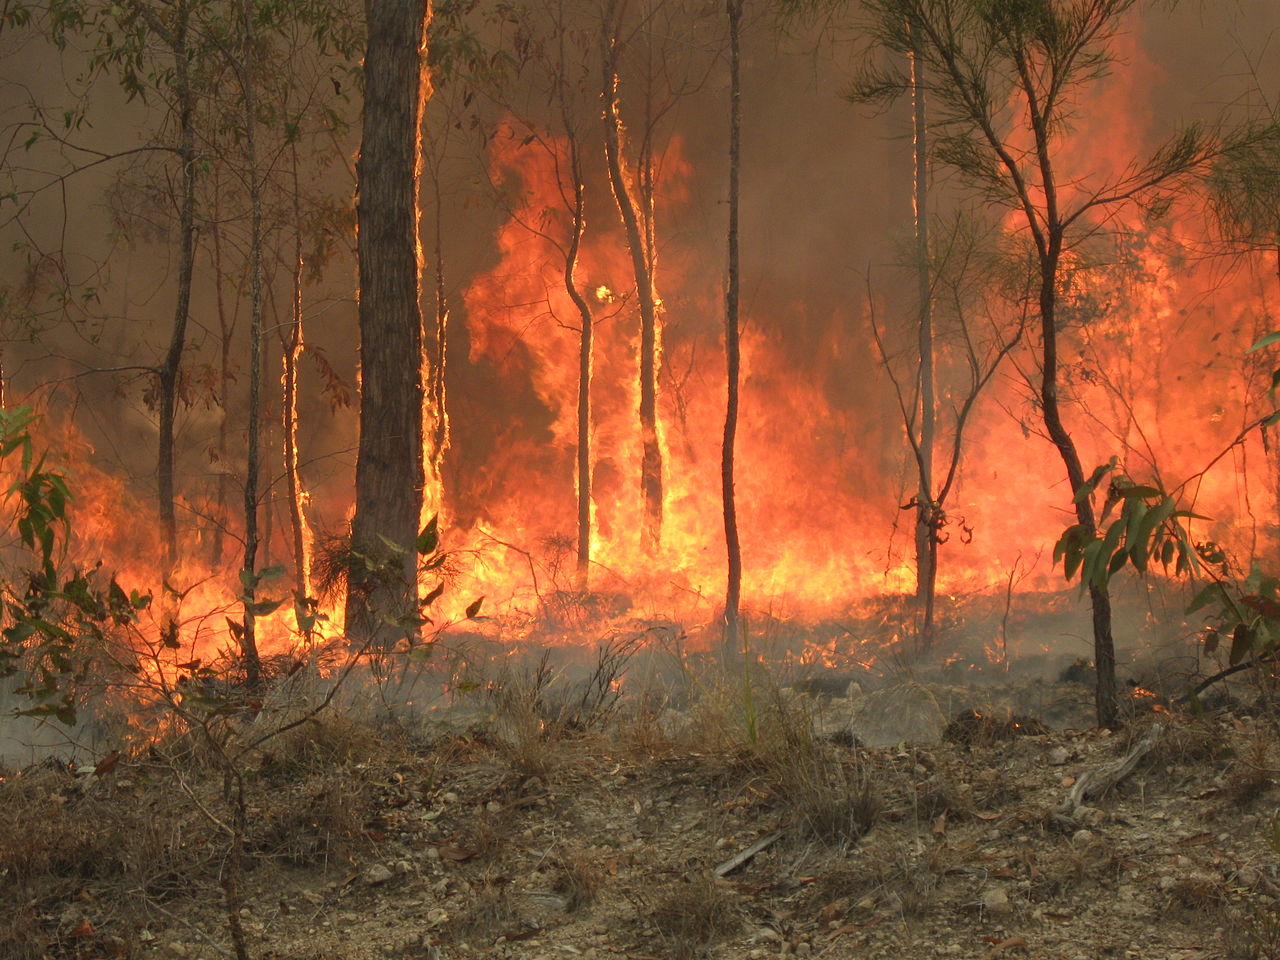 1280px-Bush_fire_at_Captain_Creek_central_Queensland_Australia By 80 trading 24 - Own work, CC BY-SA 3.0